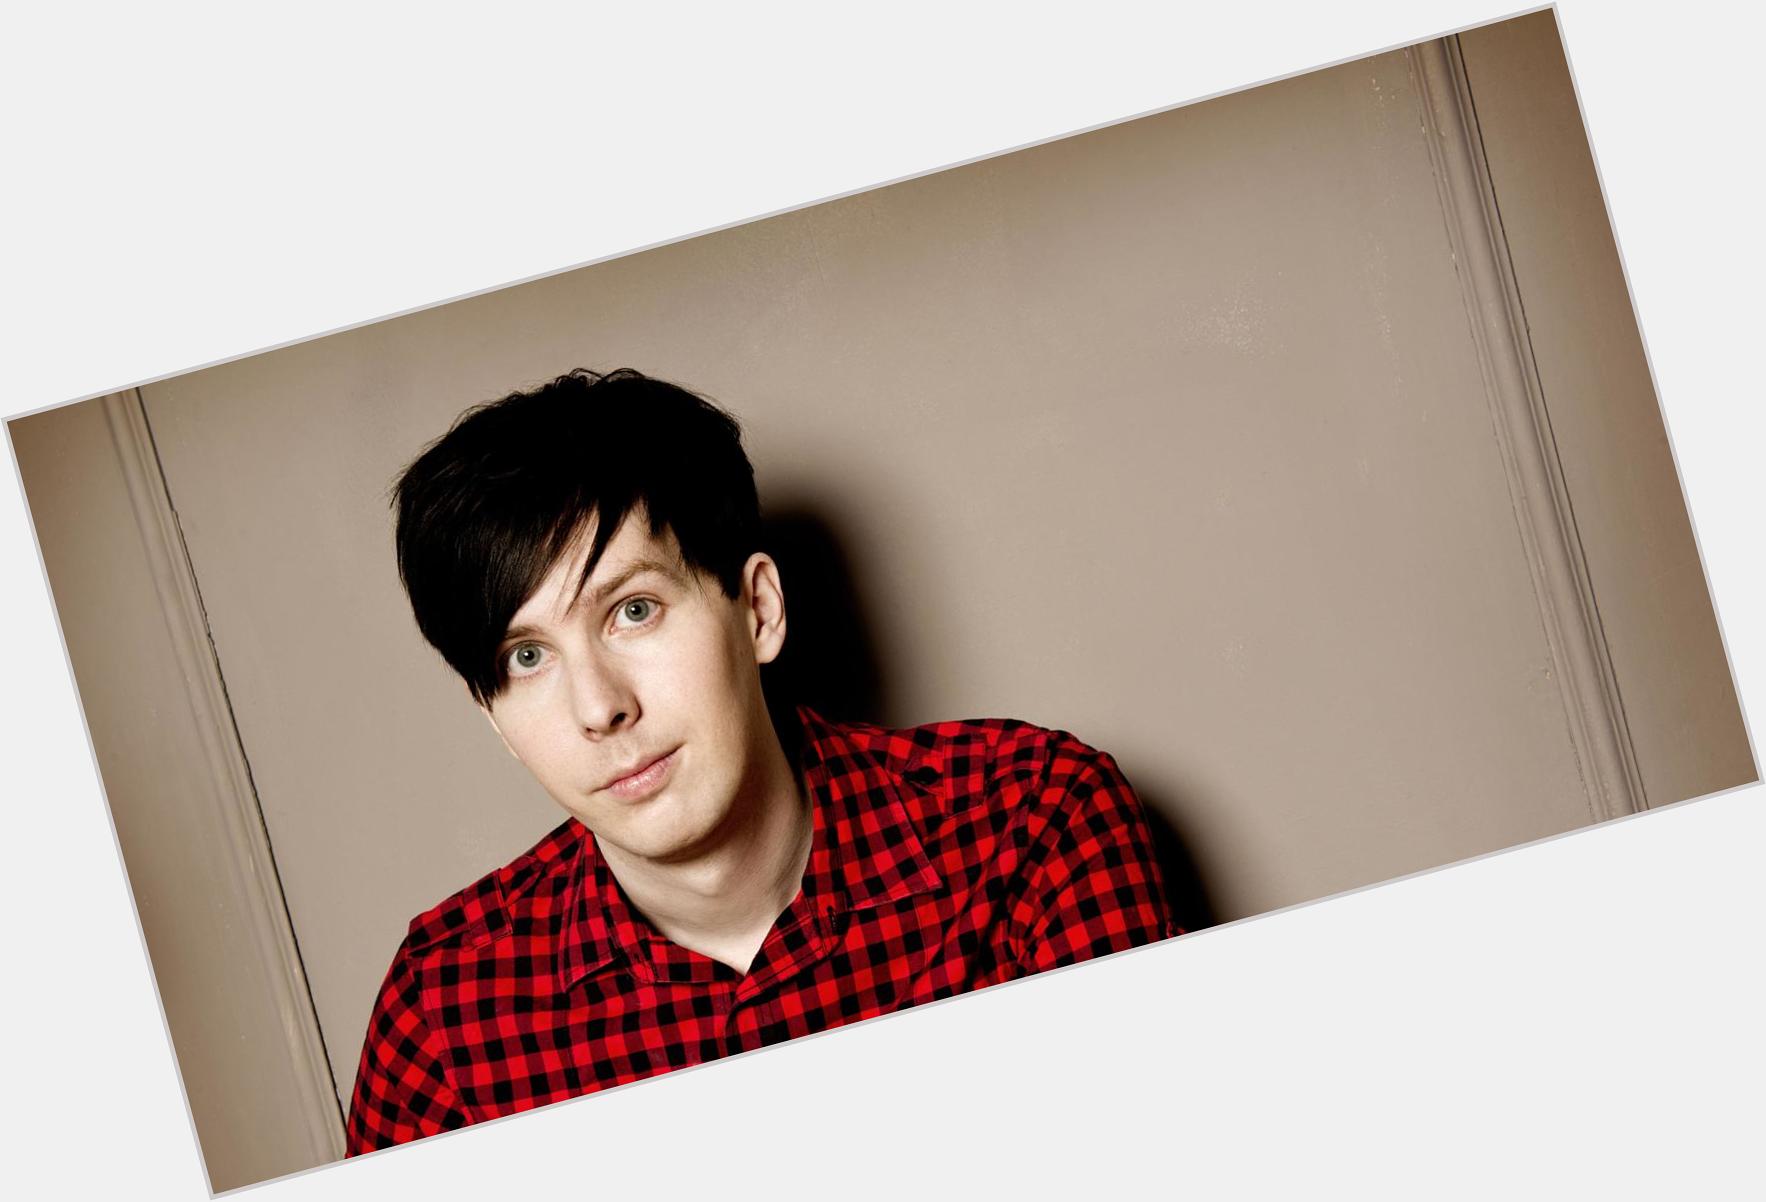 <a href="/hot-men/phil-lester/where-dating-news-photos">Phil Lester</a> Average body,  black hair & hairstyles